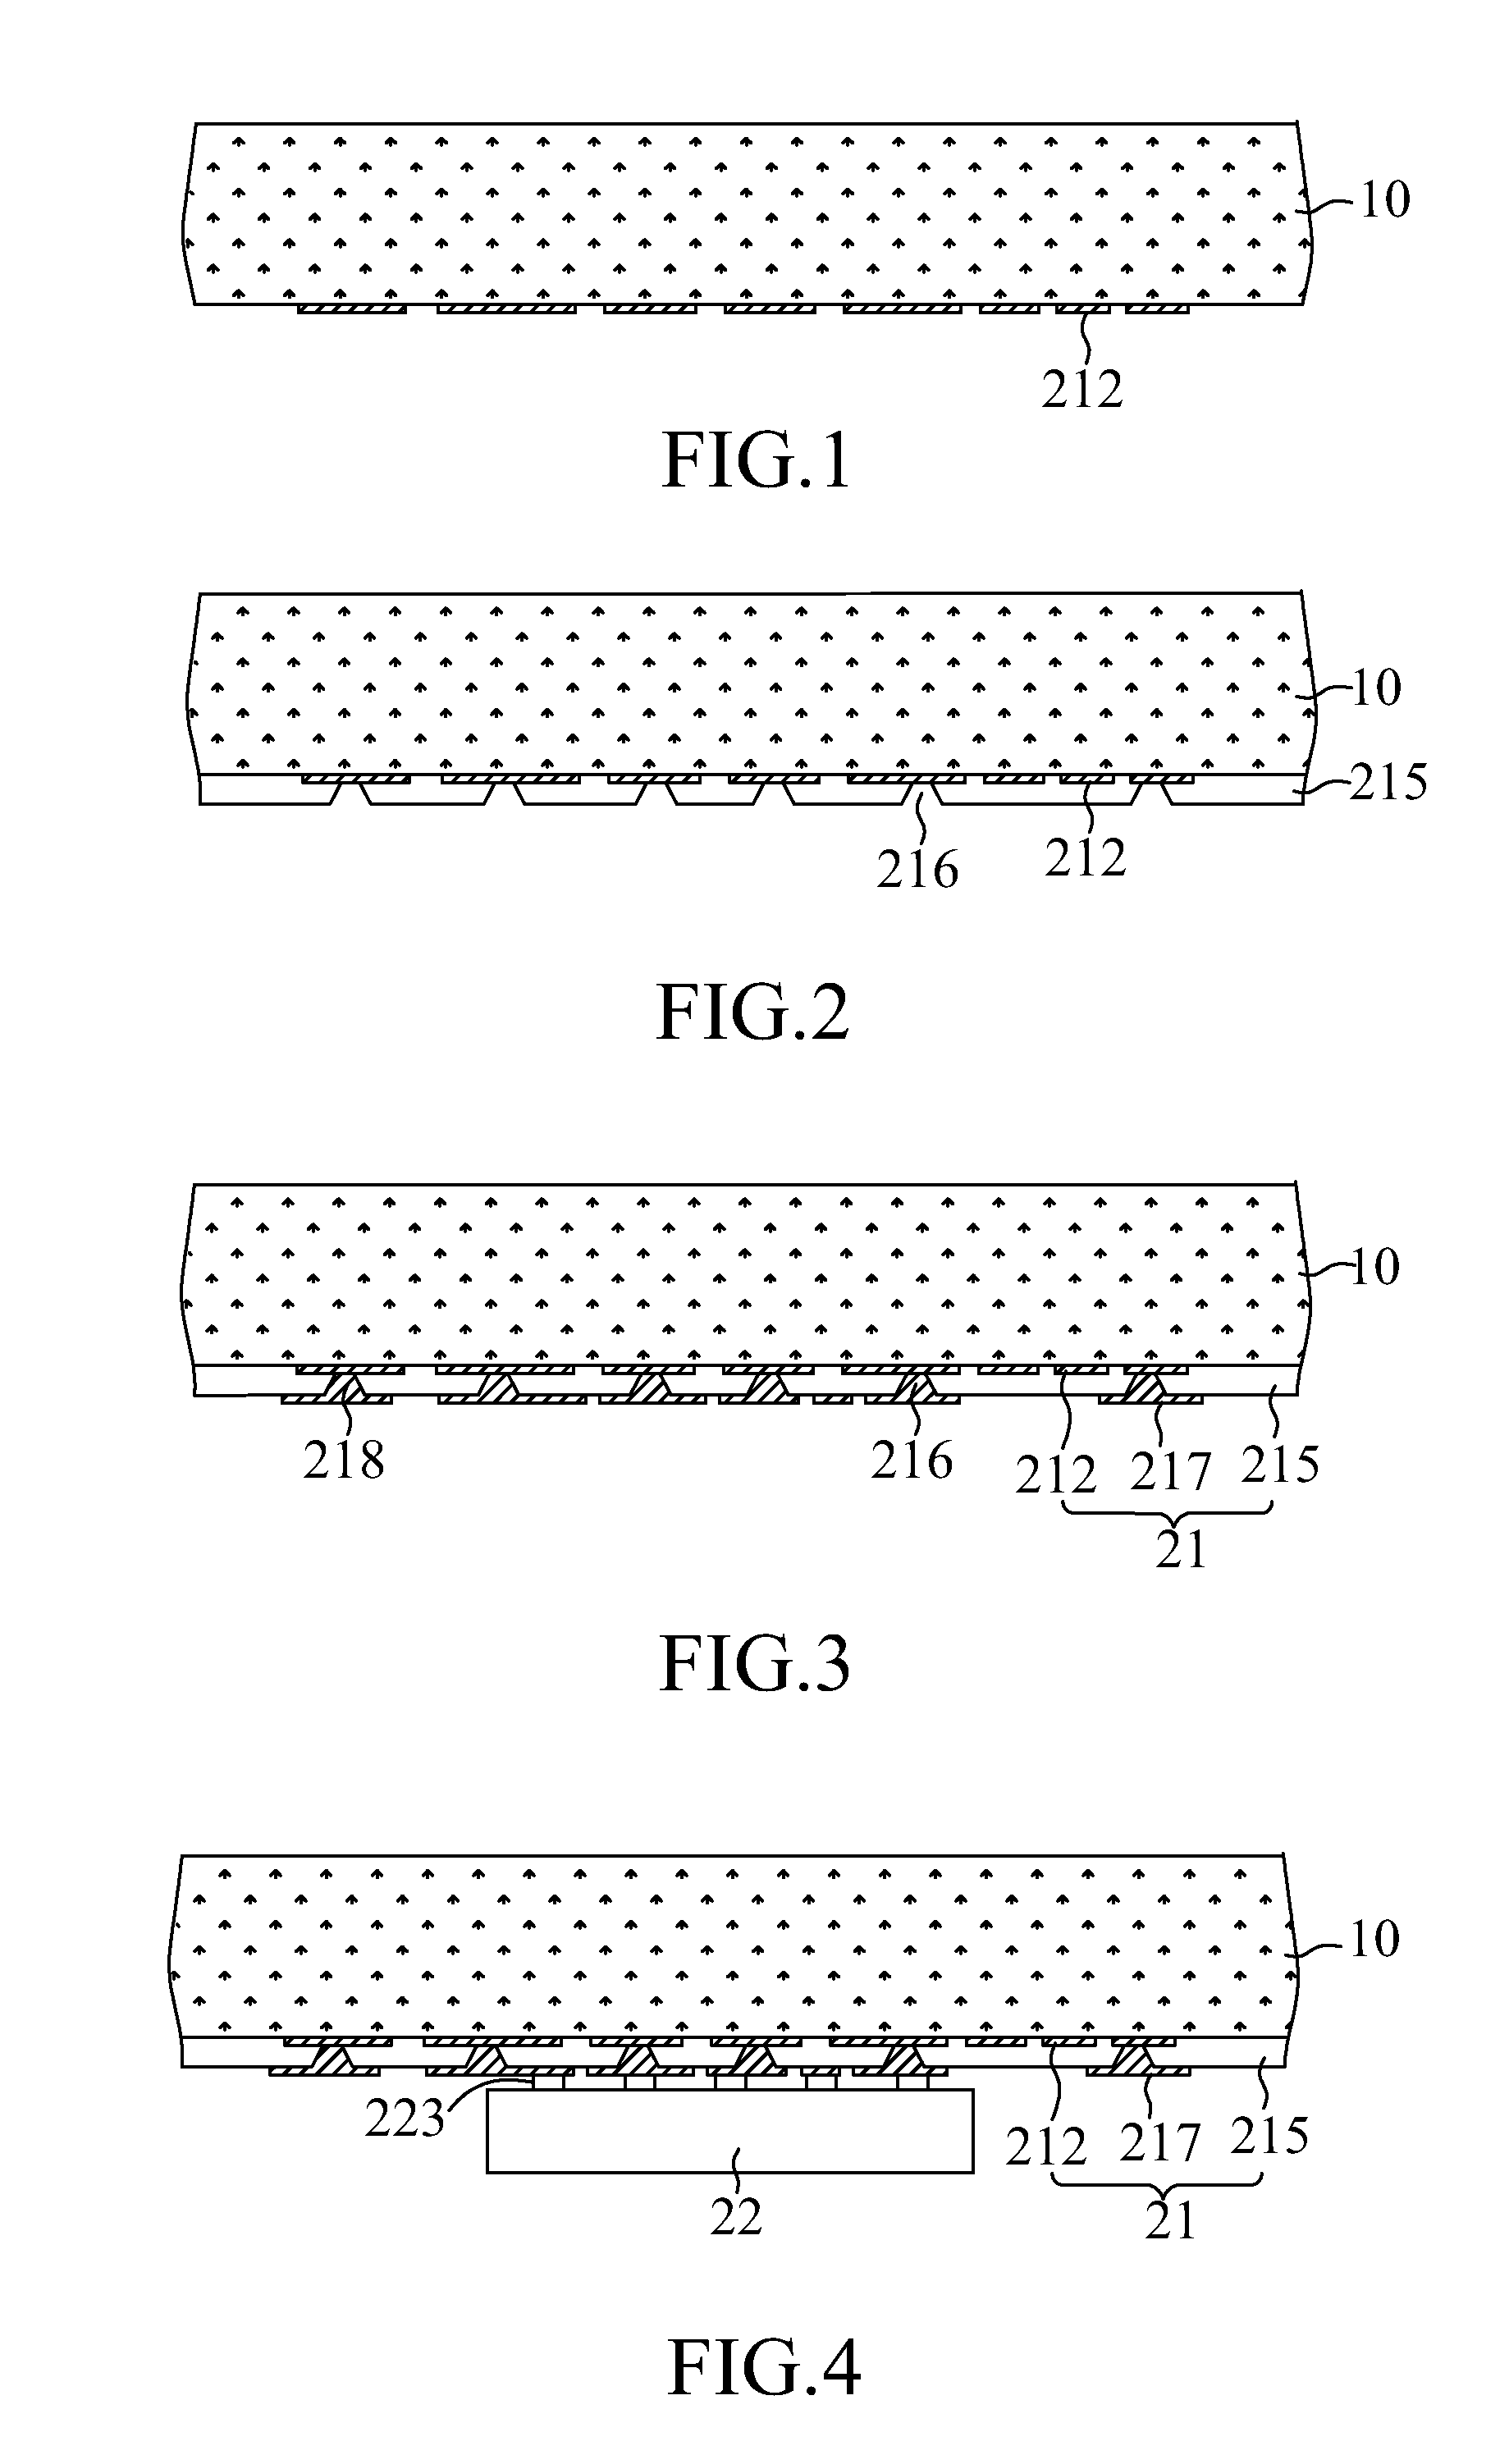 Semiconductor assembly with electromagnetic shielding and thermally enhanced characteristics and method of making the same